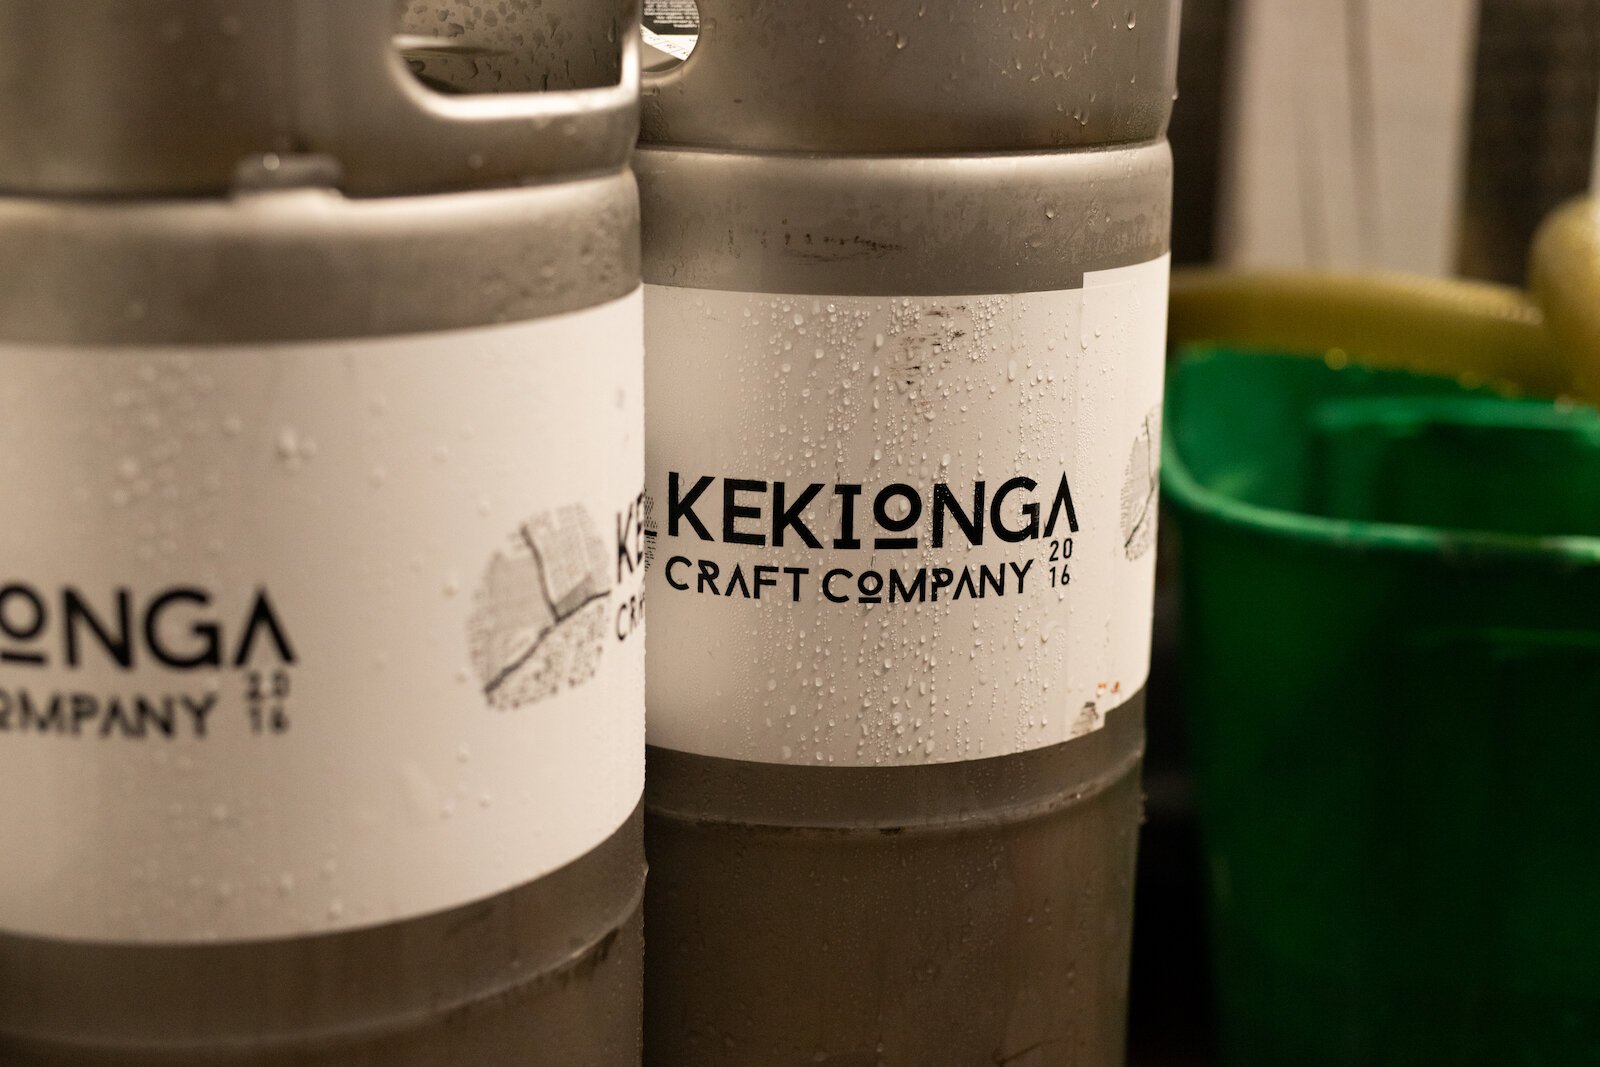 You can find Kekionga Craft's products at many local bars and restaurants in Northeast Indiana and at most major liquor stores.